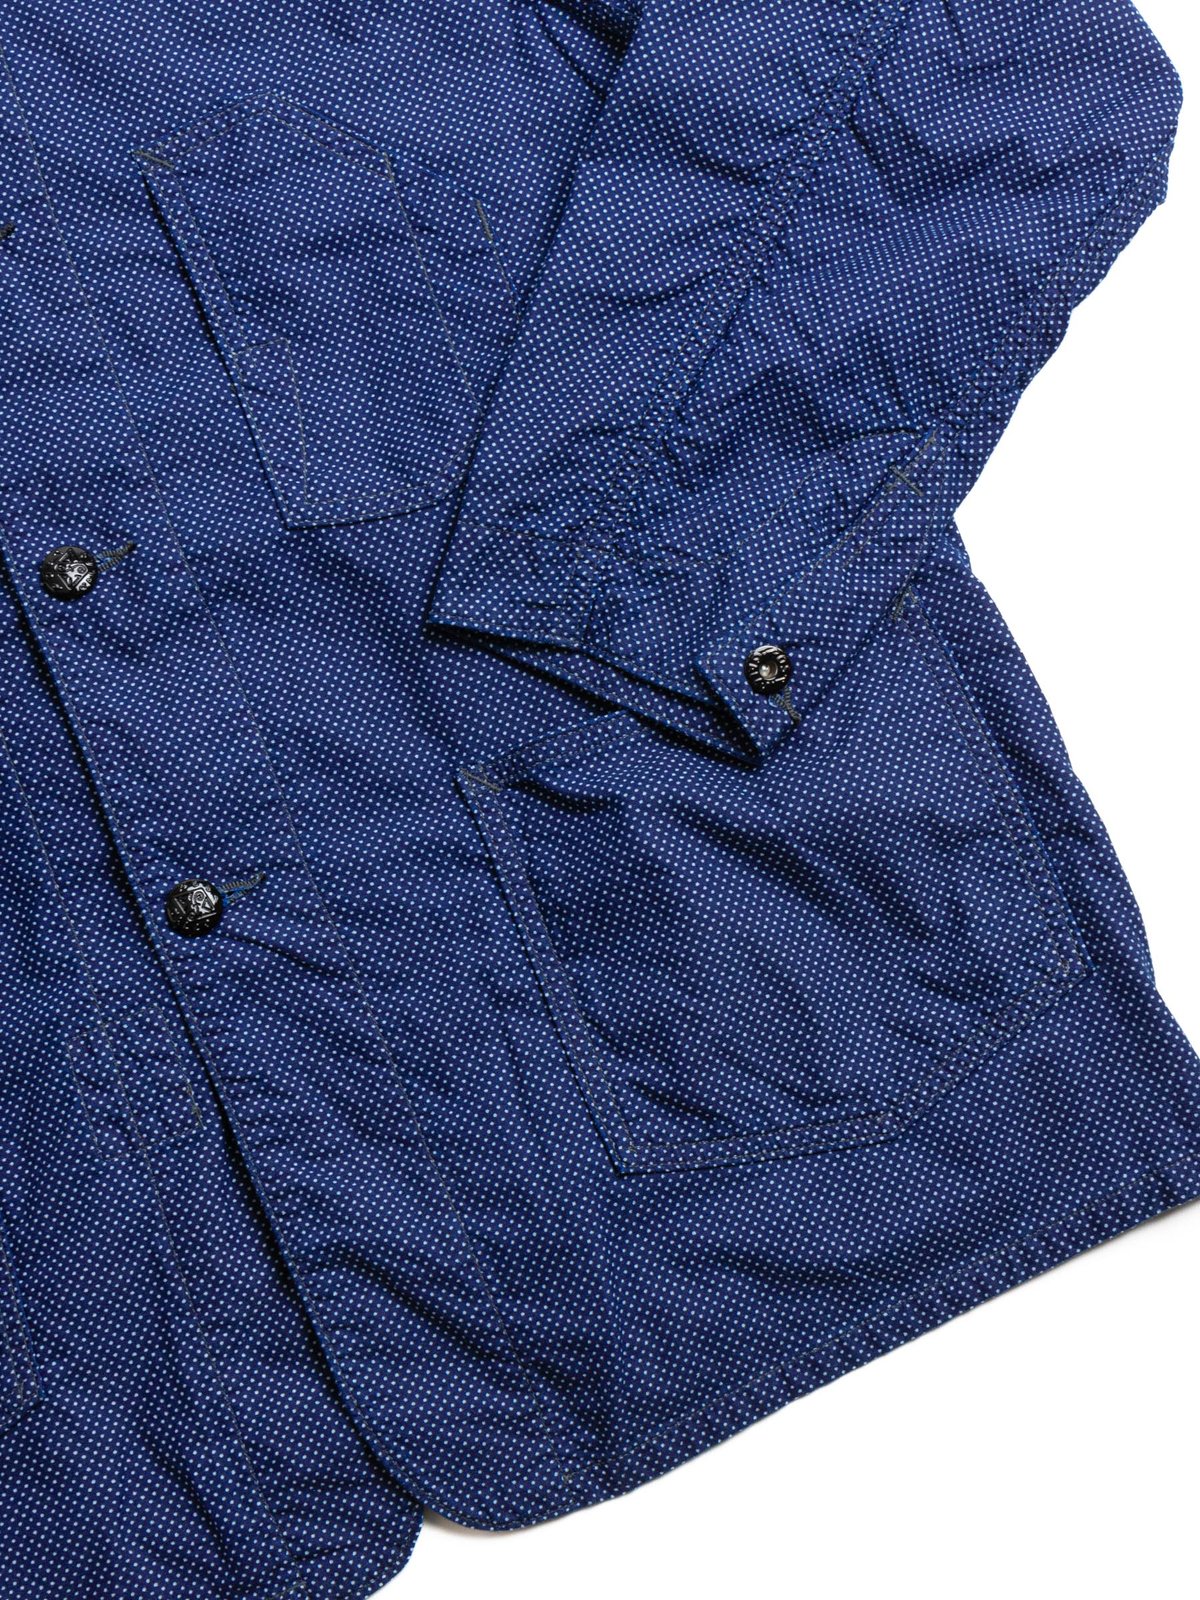 LINED No1 JACKET DOT X FEATHER CHAMBRAY - Image 3